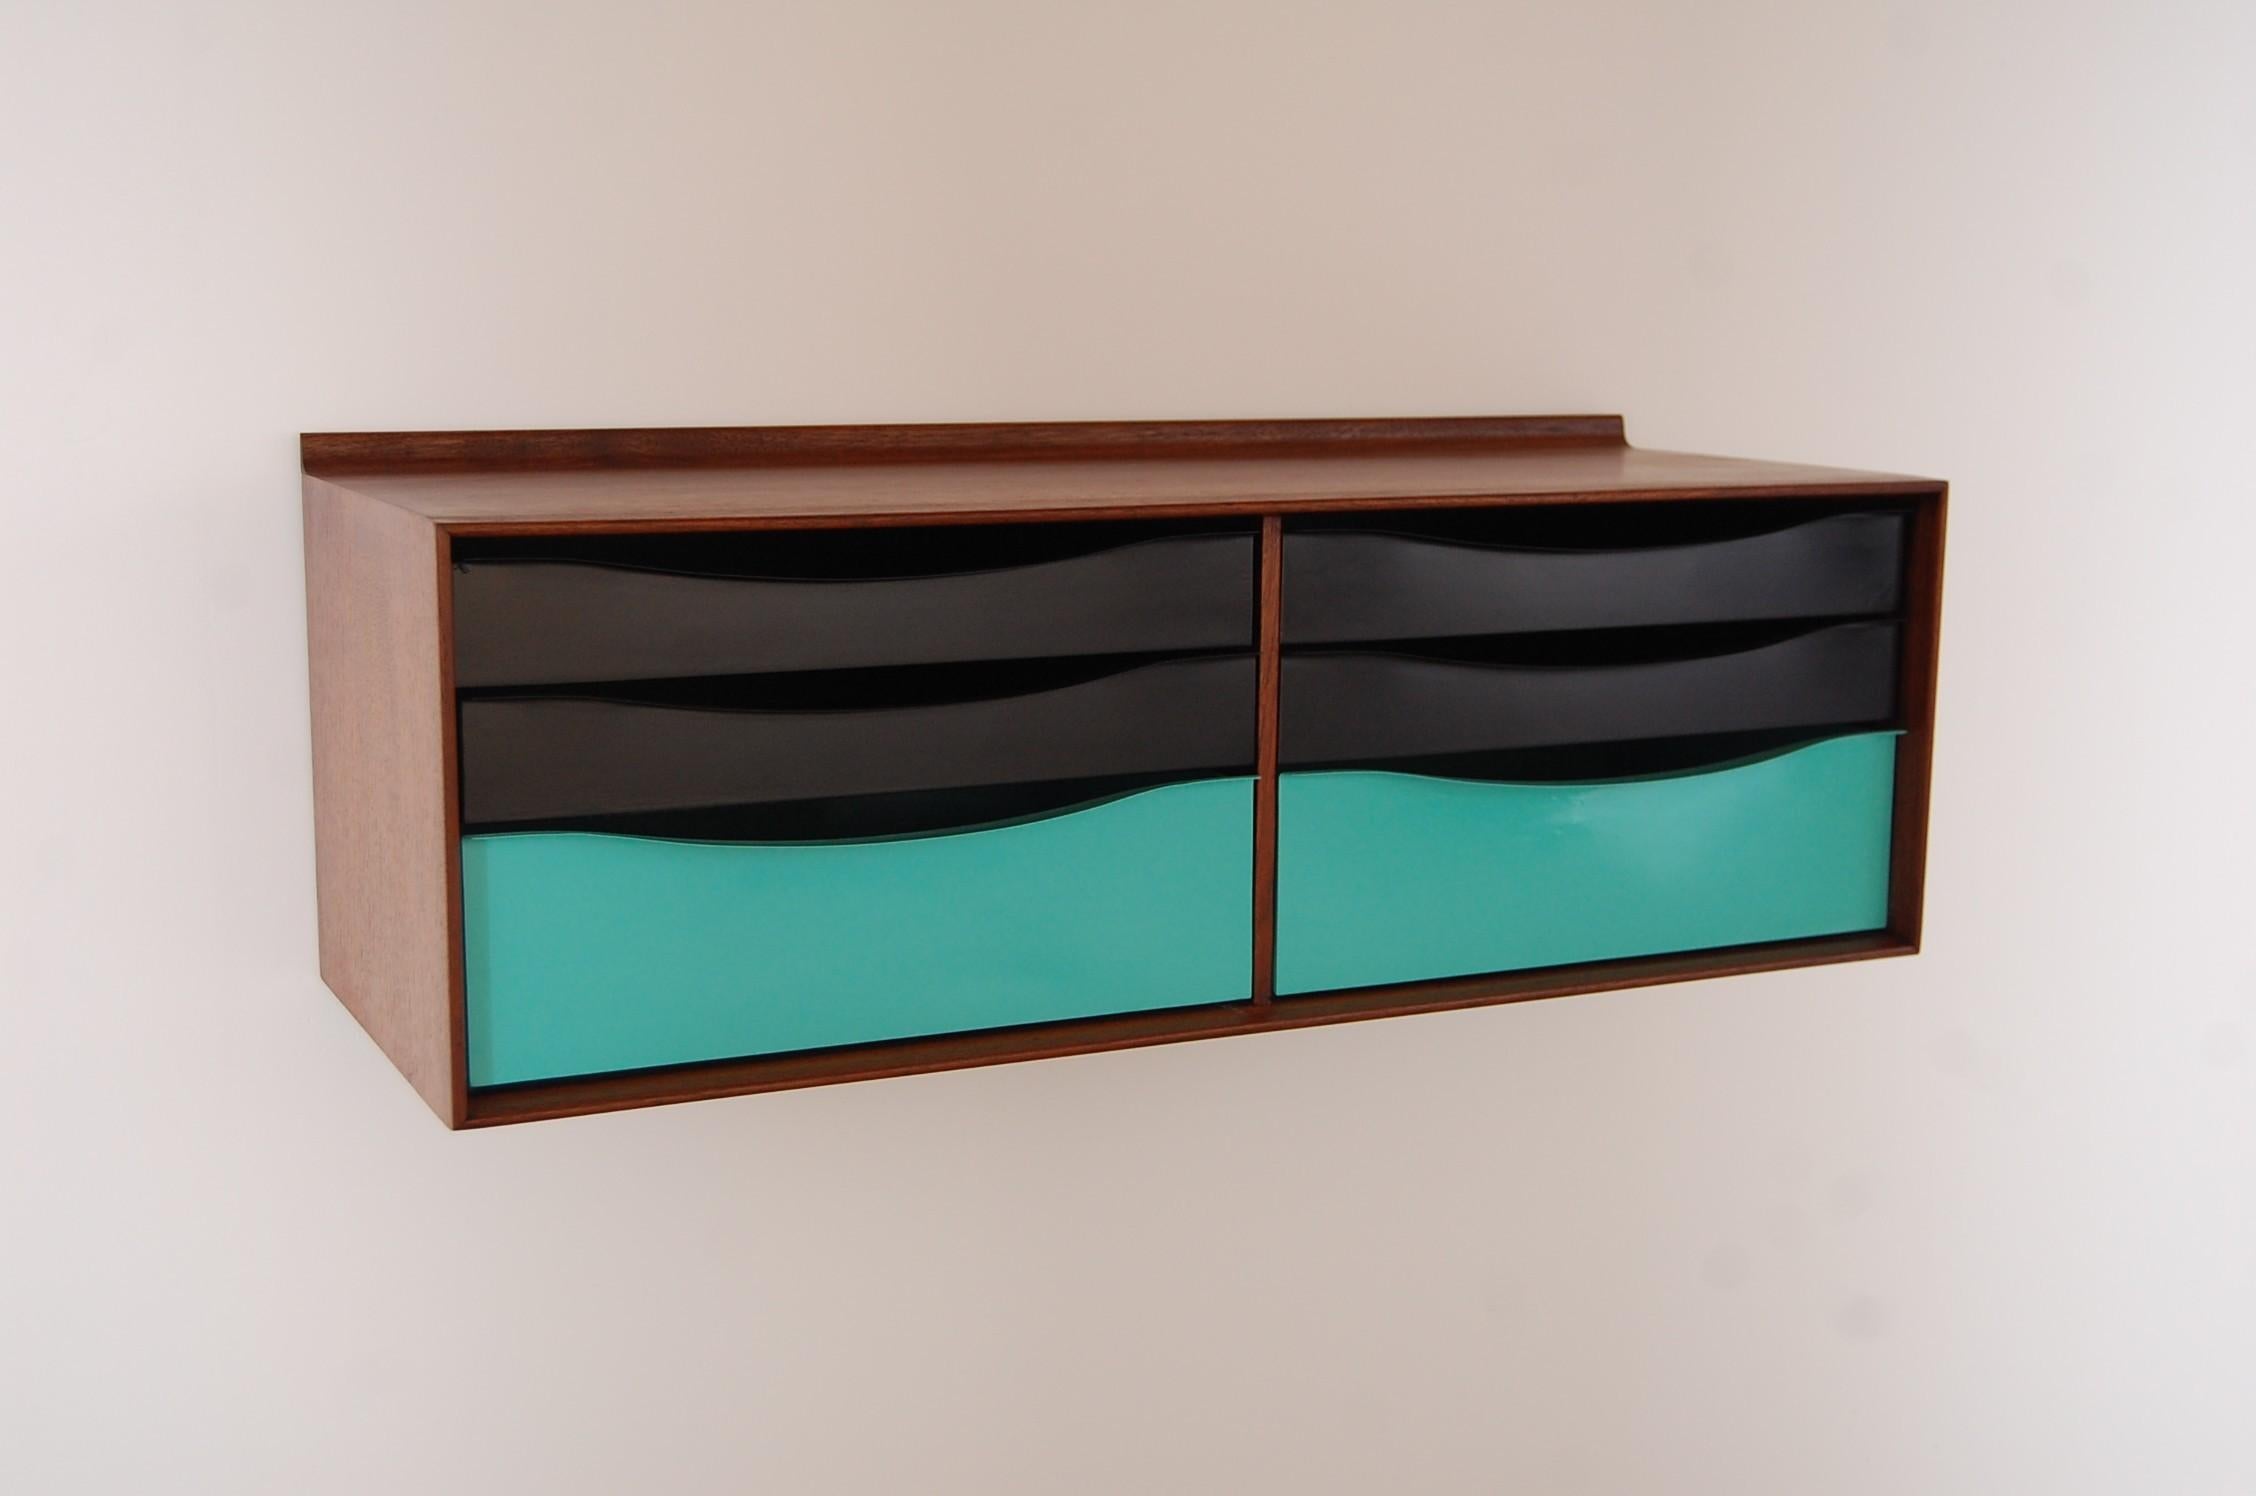 Hanging cabinet in walnut and metal, circa 1964. Walnut cabinet has been professionally refinished, and the six metal drawers have been re-lacquered with colors closely matching the colors they were in when we acquired the cabinet. We can change the